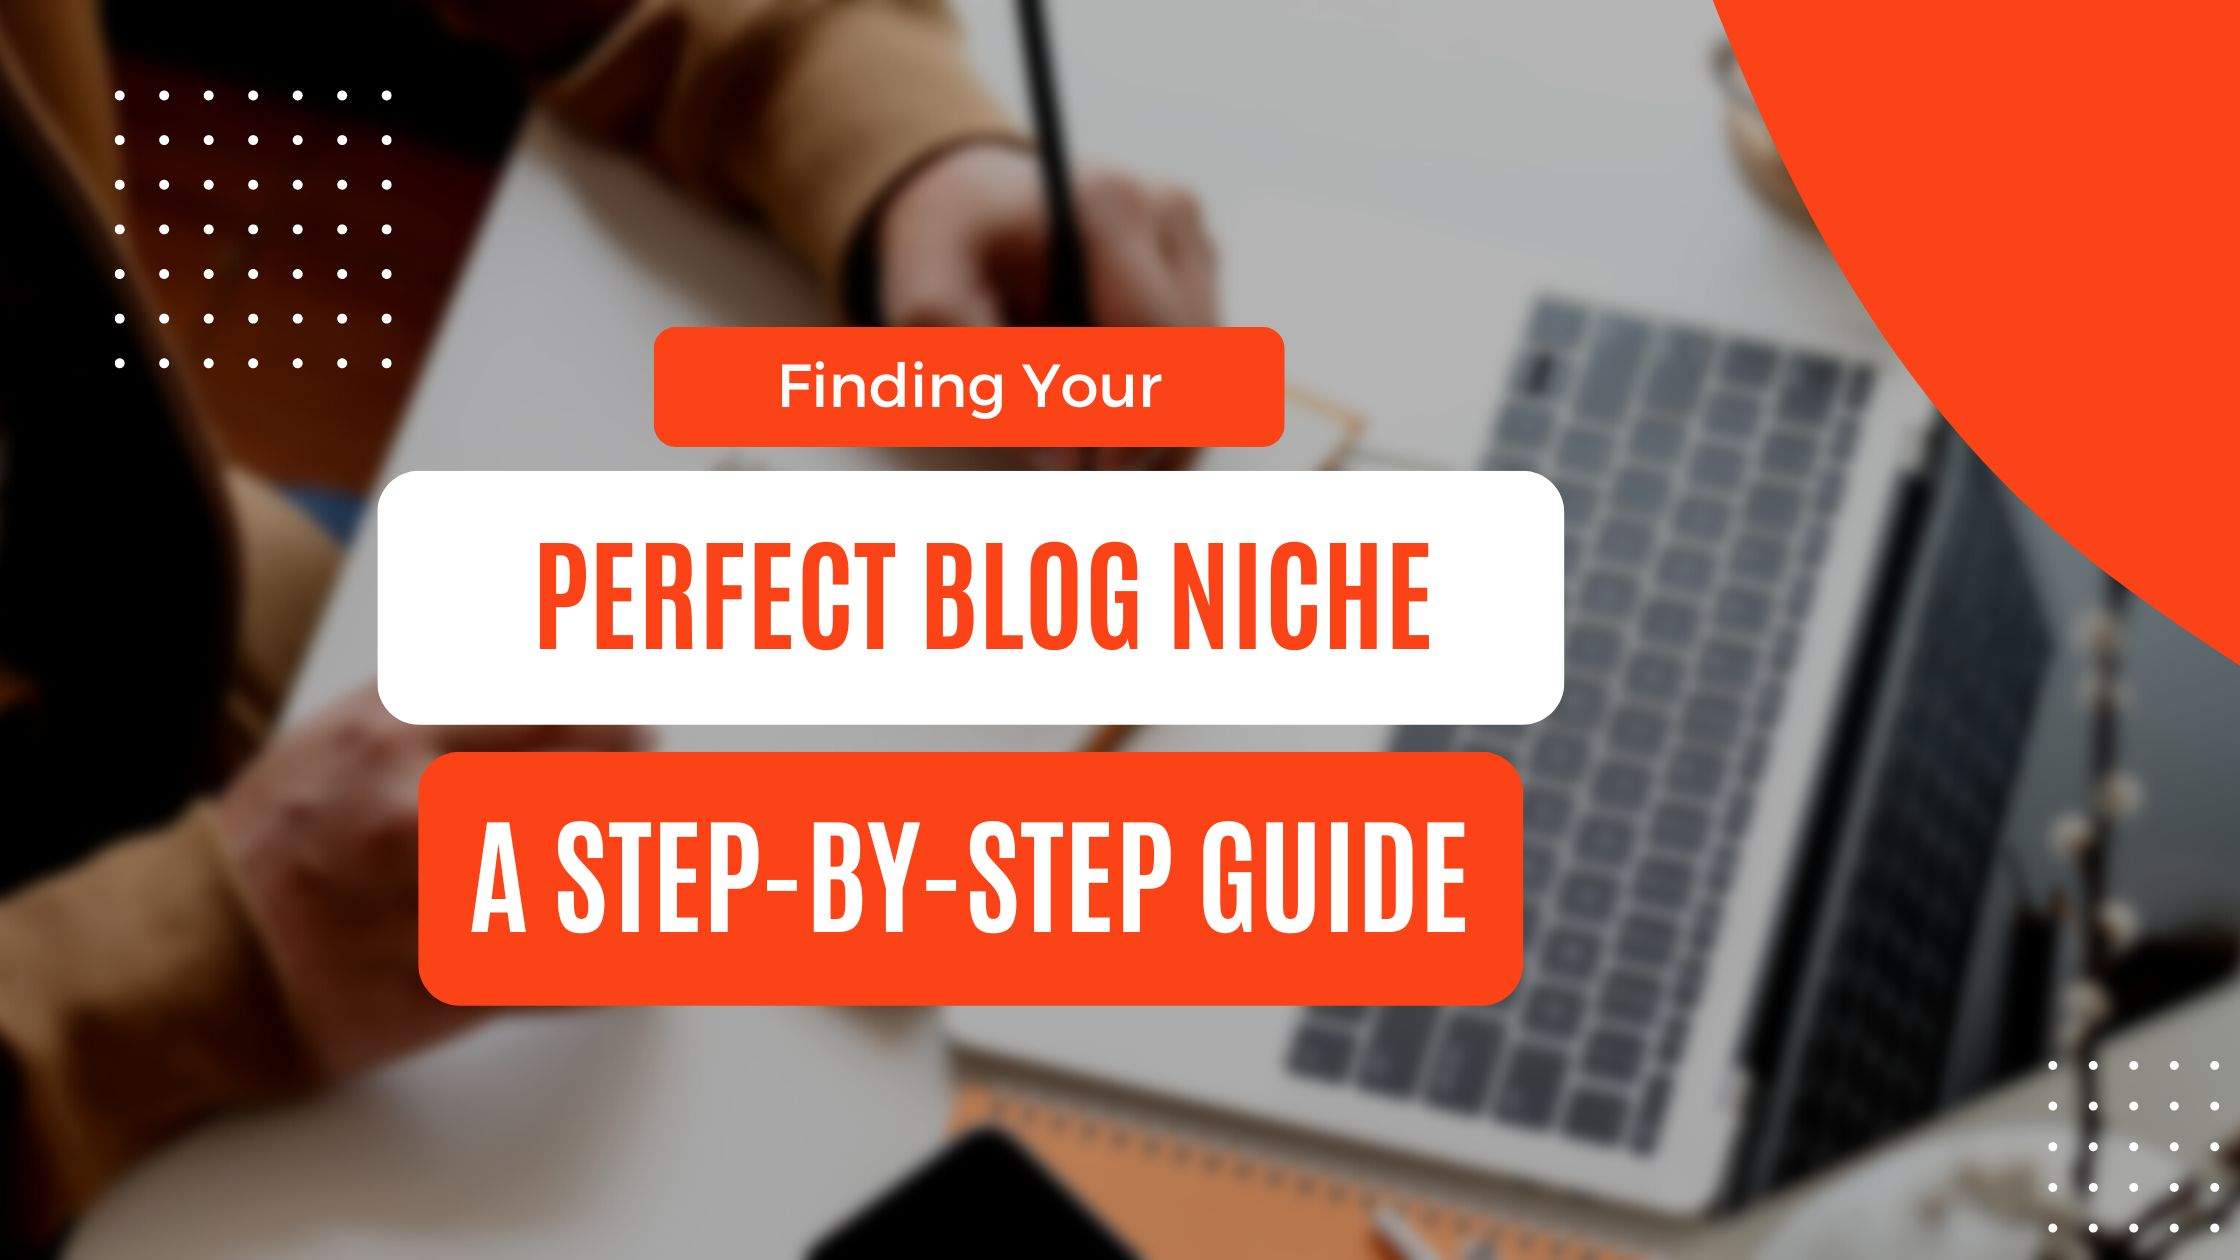 Finding Your Perfect Blog Niche A Step-by-Step Guide